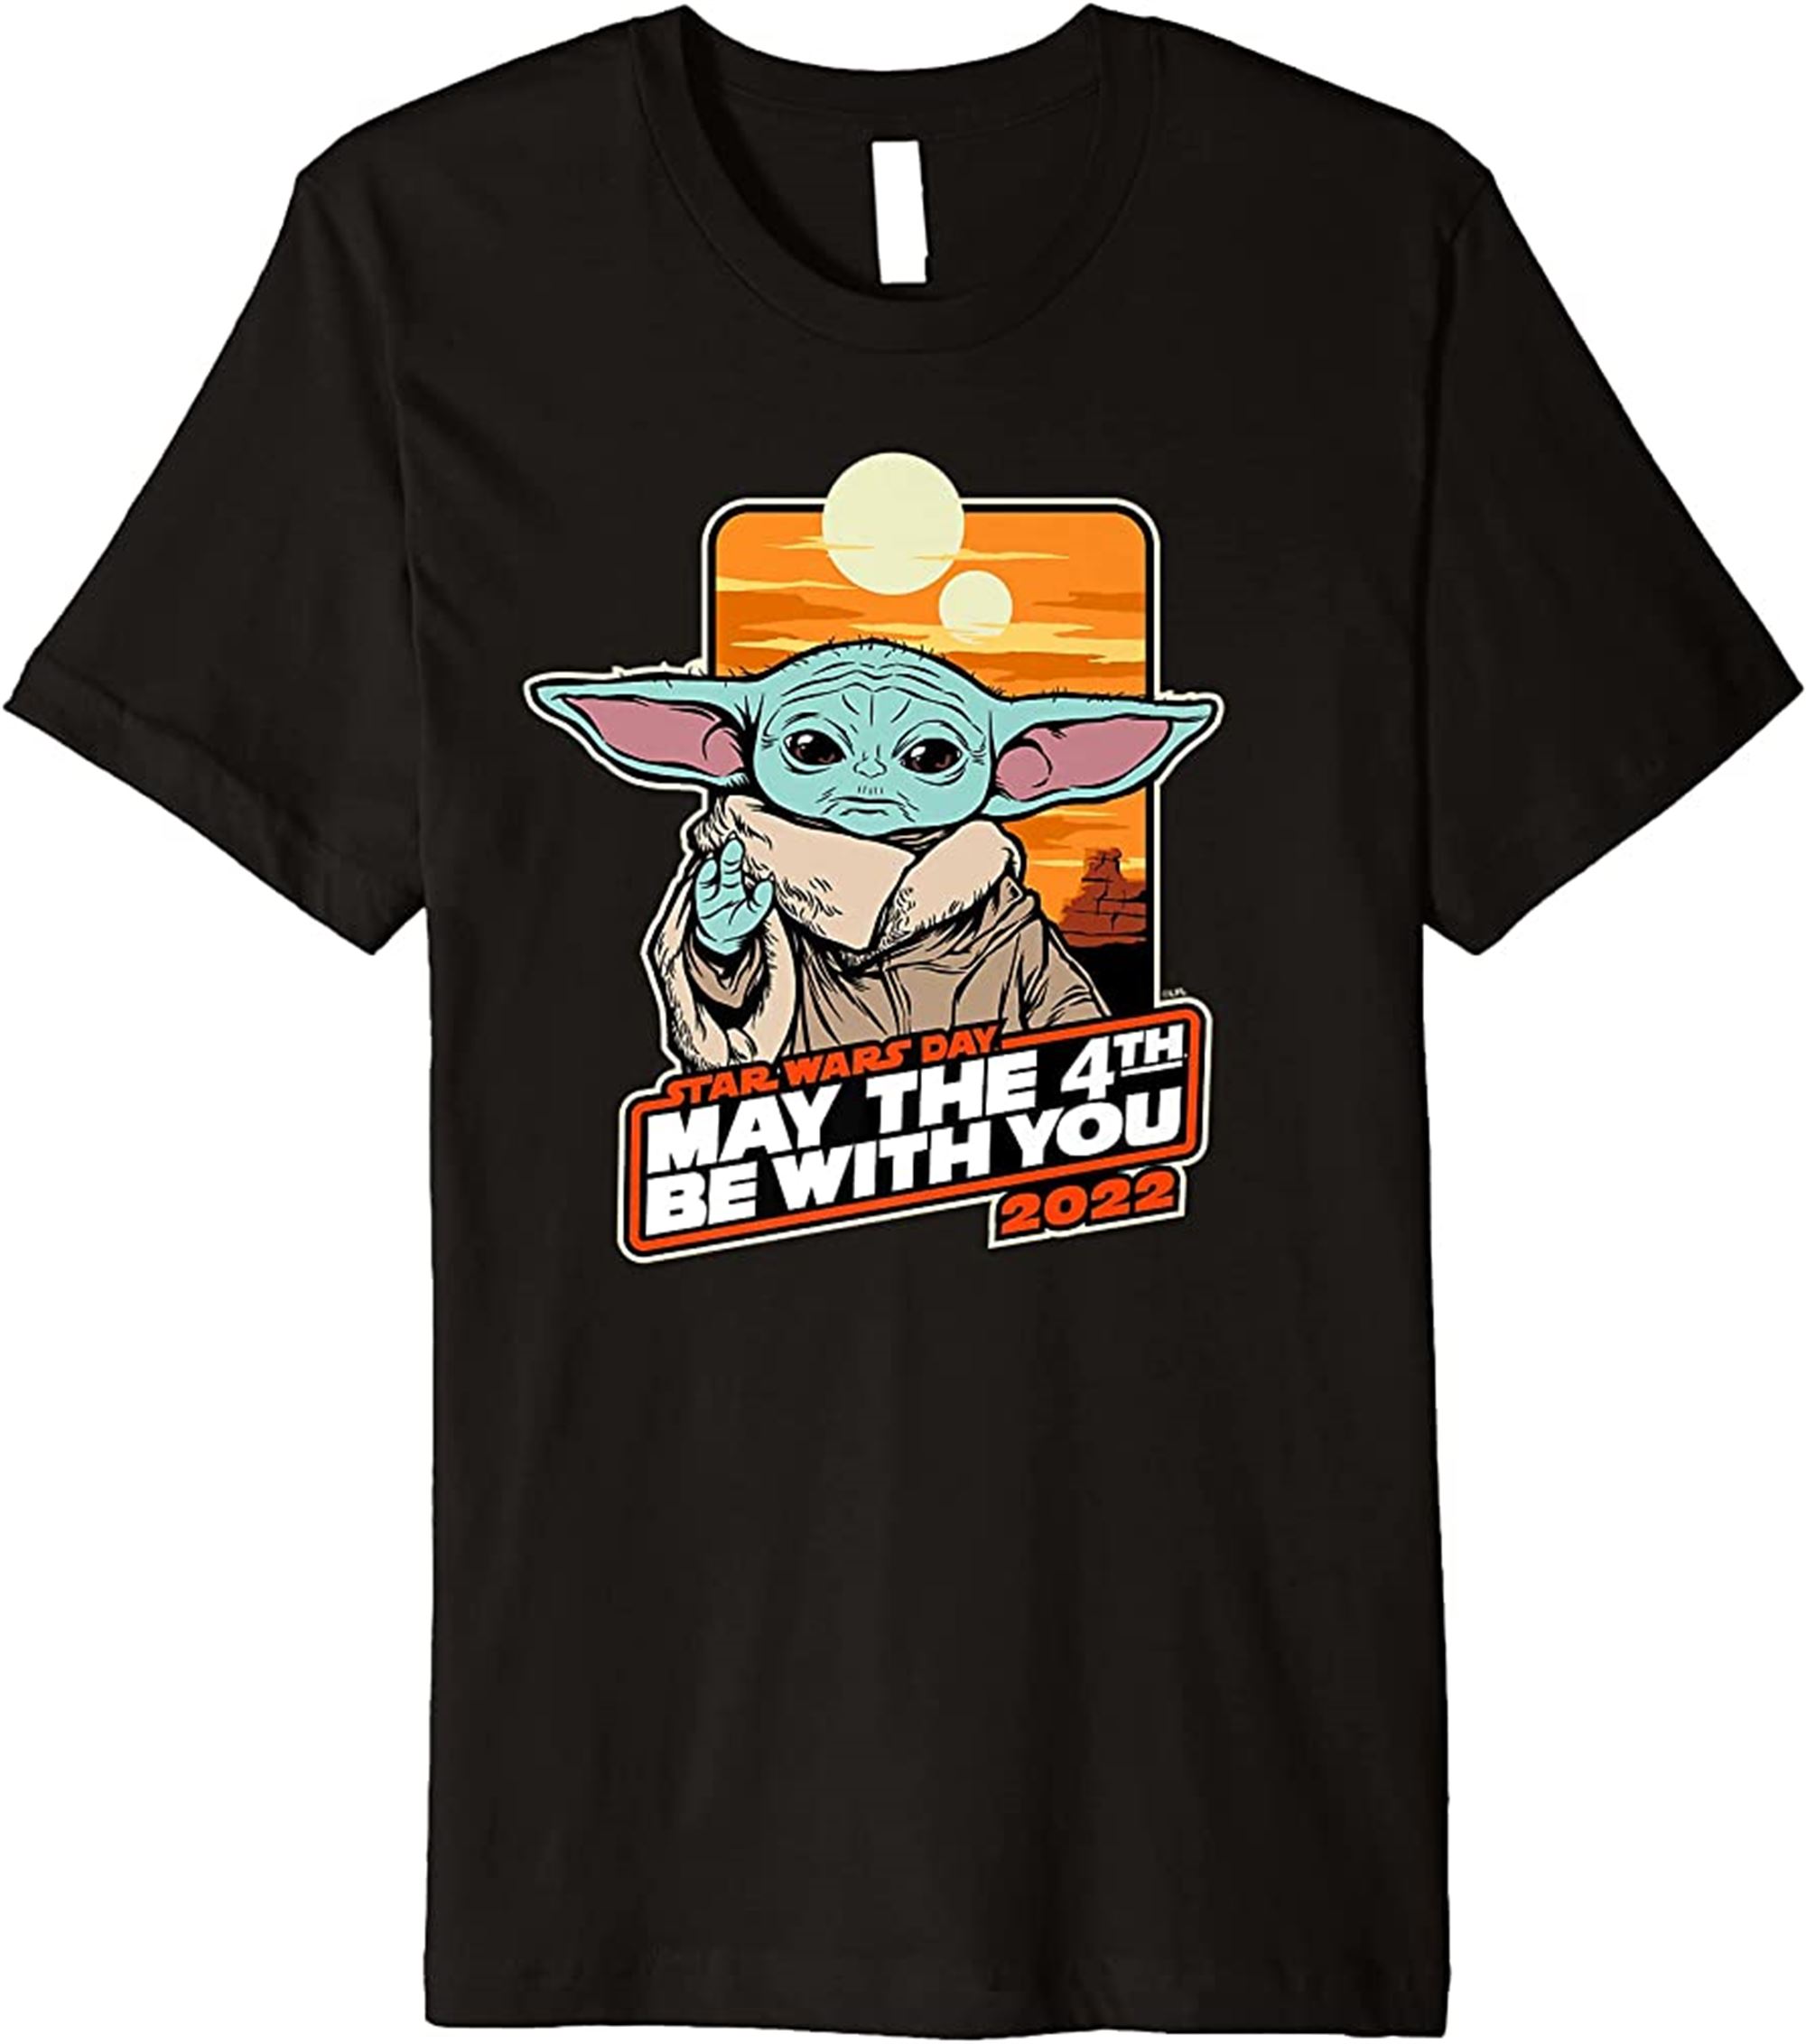 Grogu May The 4th Be With You 2022 Premium T-shirt Size Up To 5xl